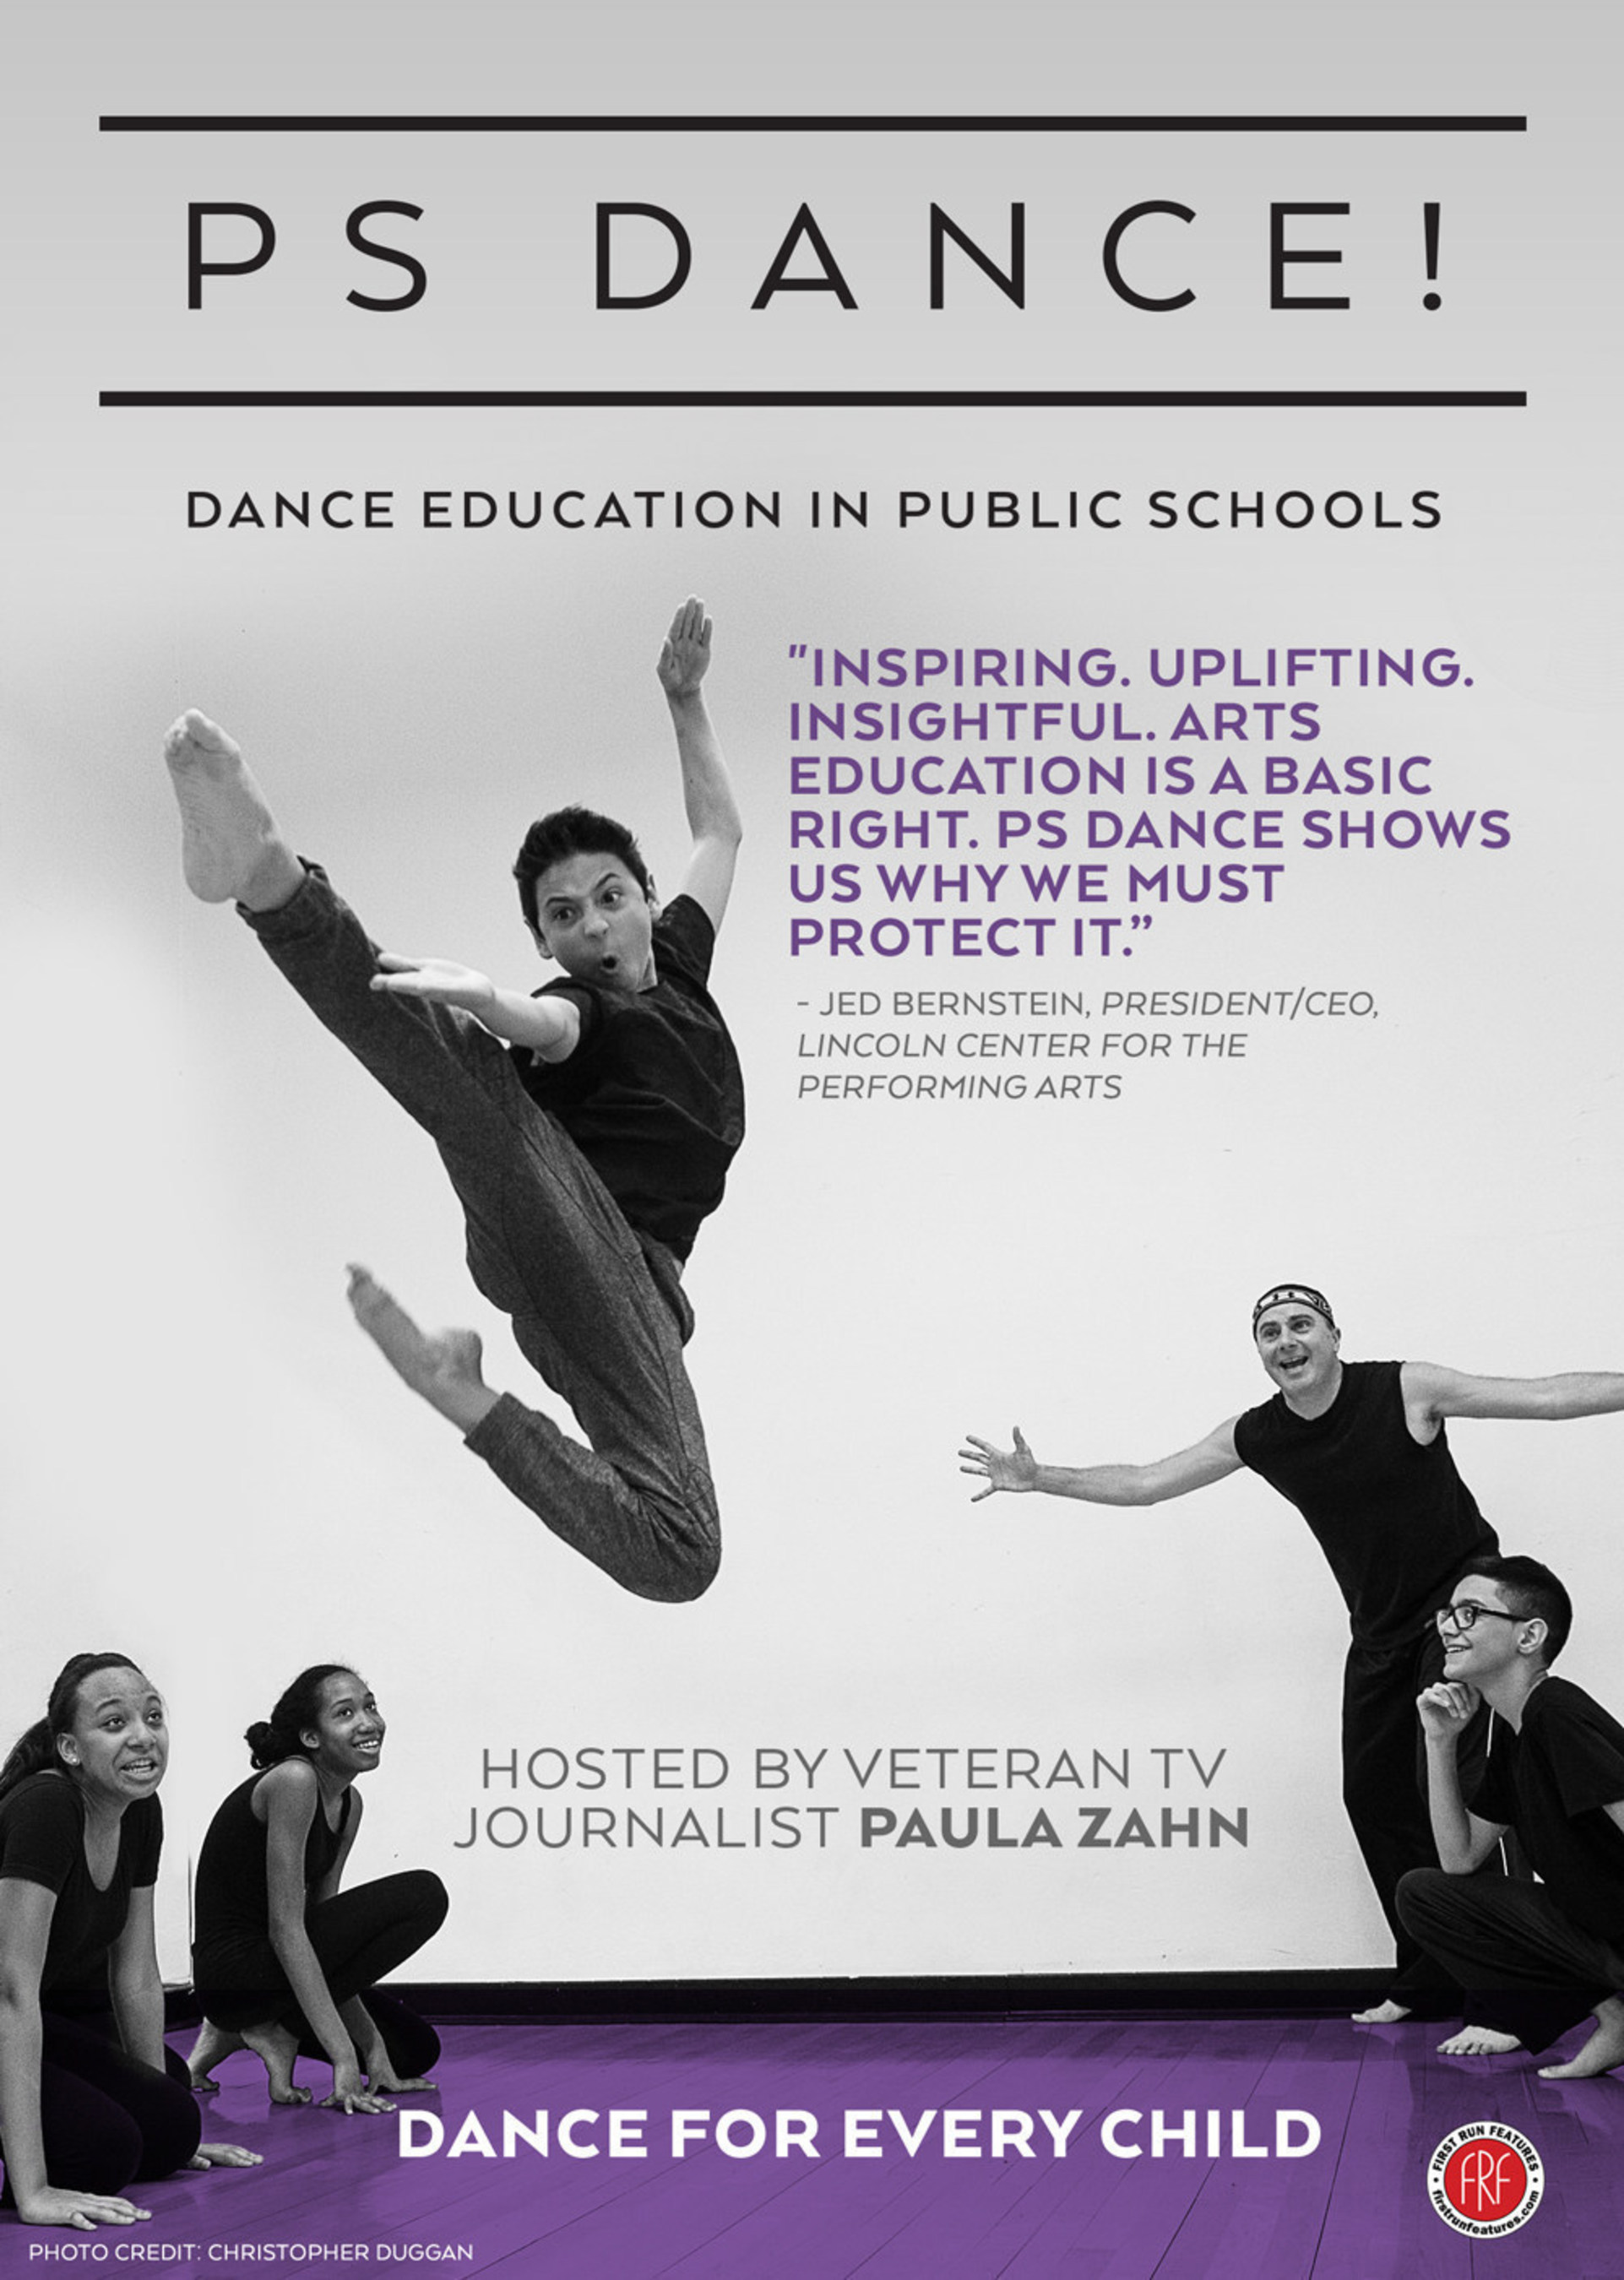 PS DANCE! is an inspiring documentary showcasing the profound effects of dance education in NYC public schools.